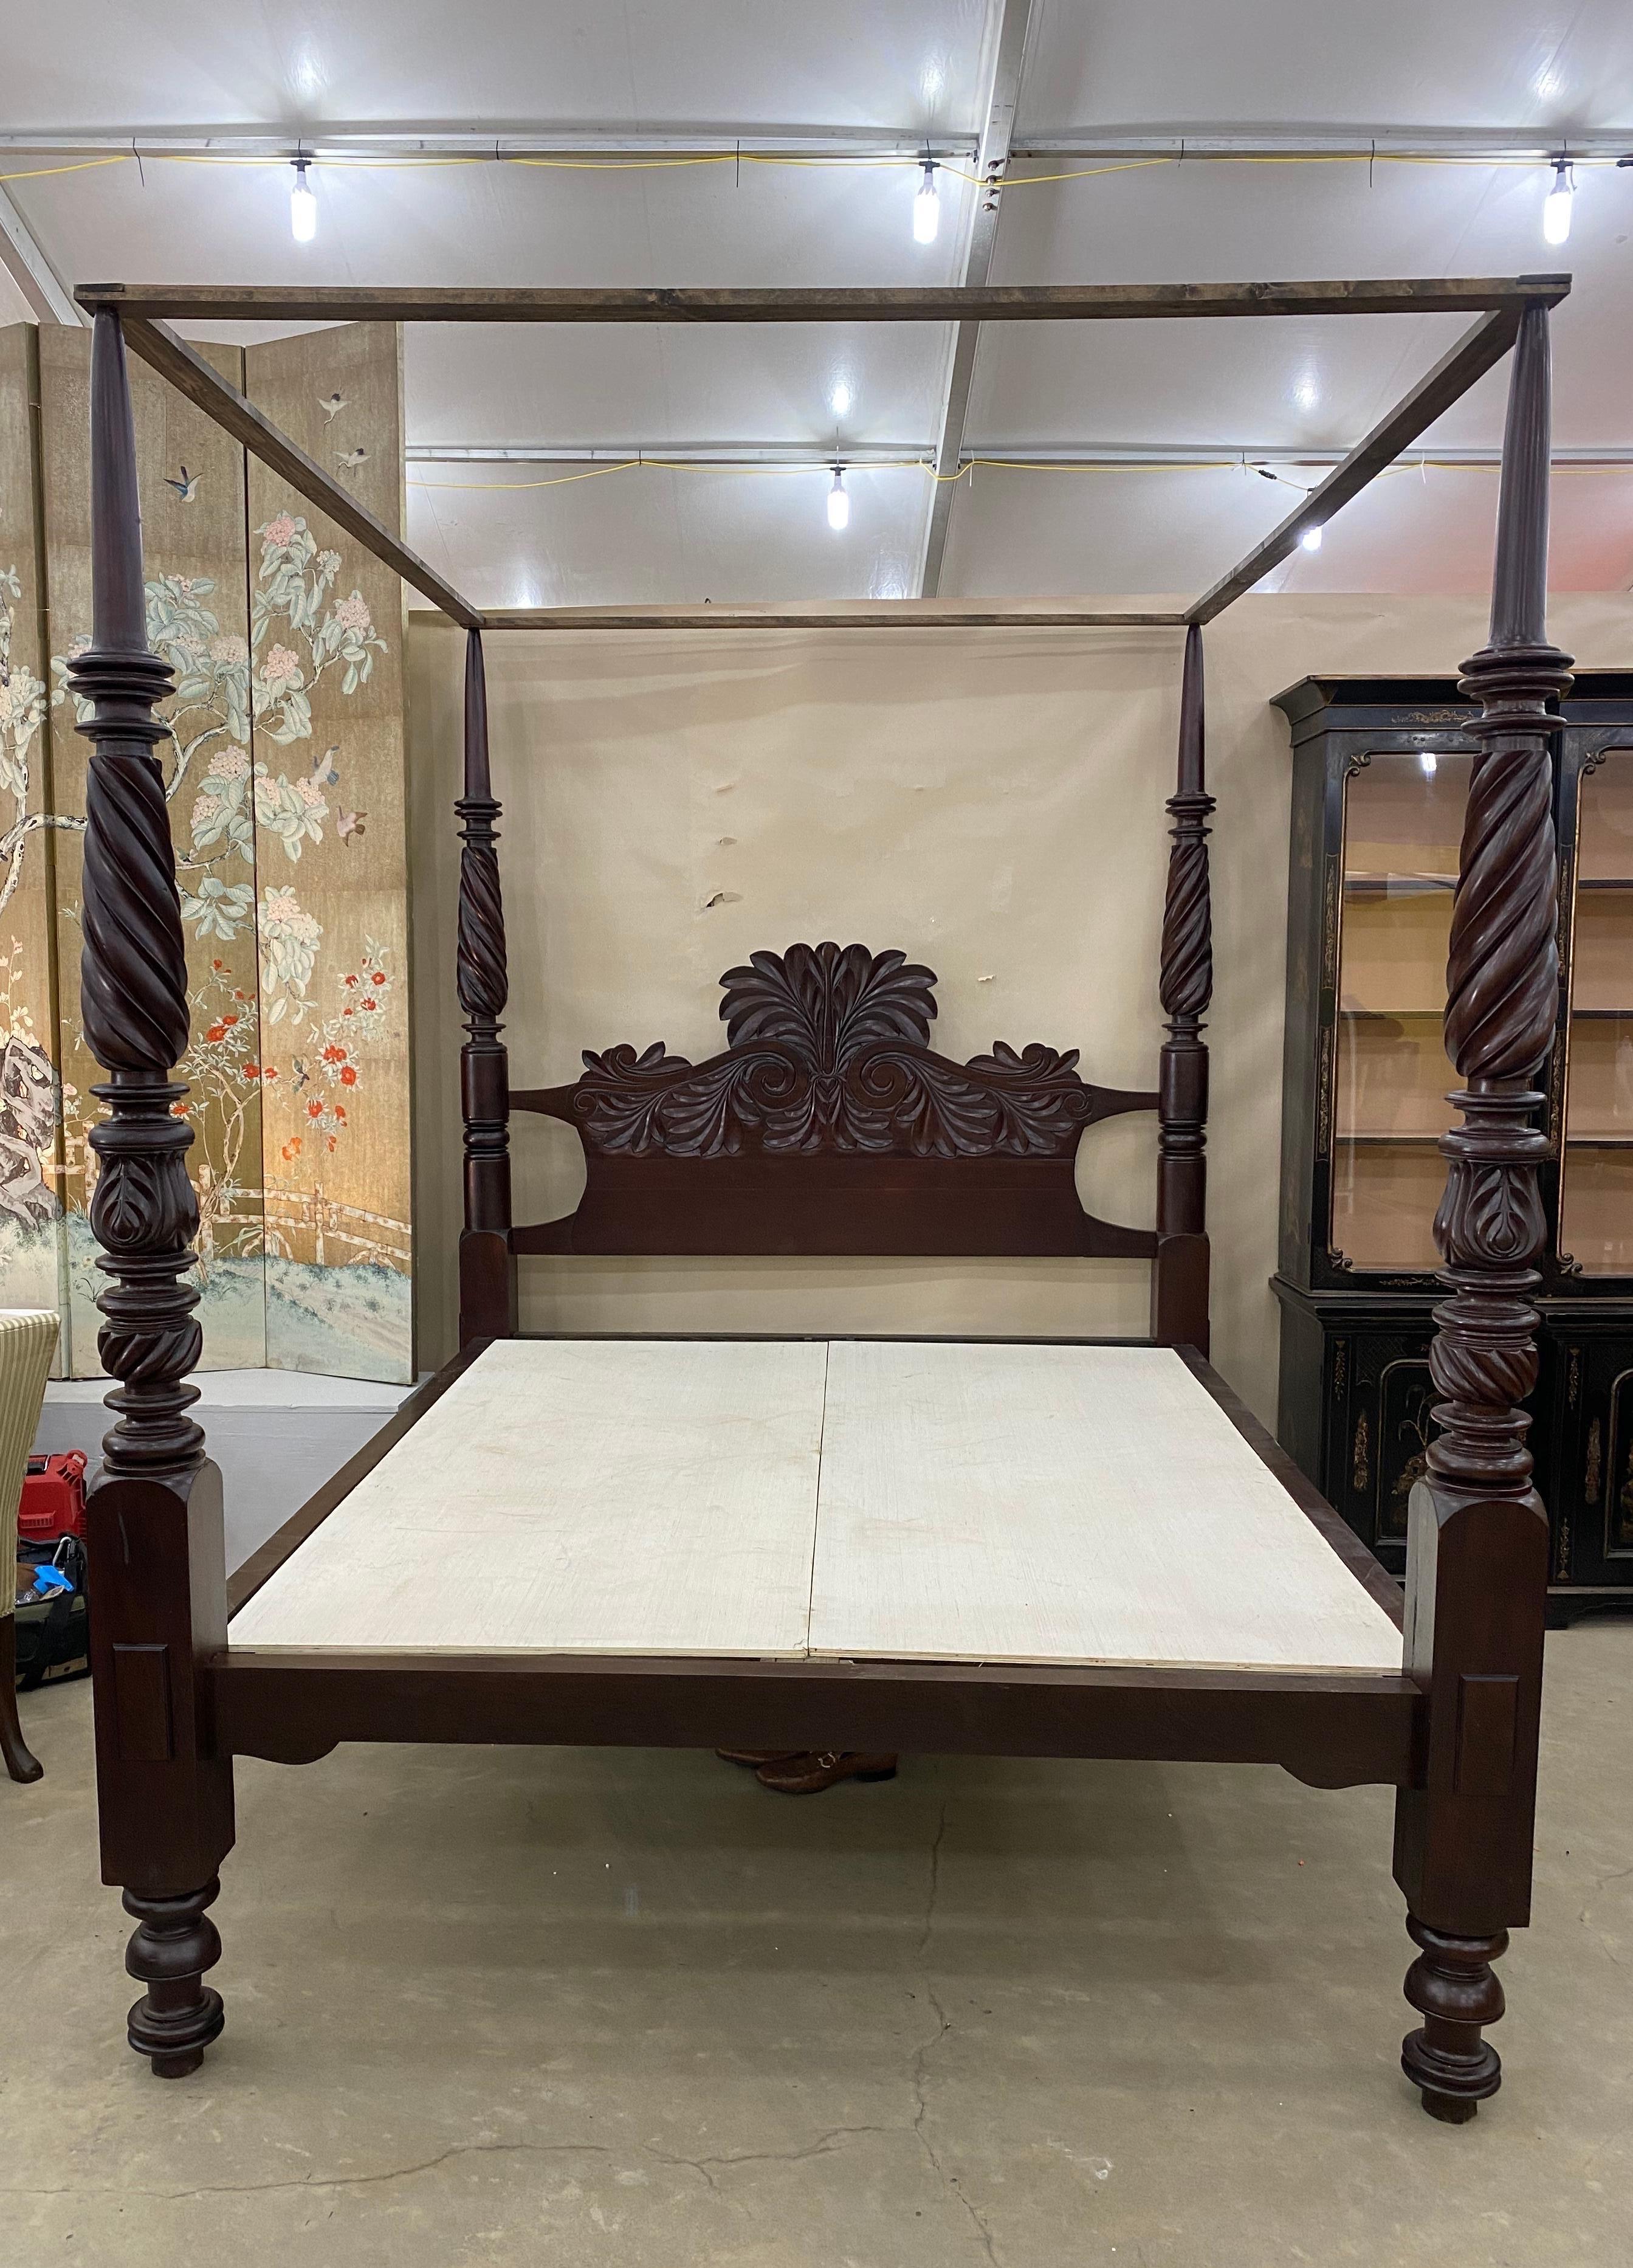 Incredible 19th century British West Indies 4 post bed from Jamaica. Incredibly hand carved bed made of the finest local Jamaican mahogany in the 1820s. The headboard is a typical Jamaican theme but includes a fairly rarely seen heart motif carved